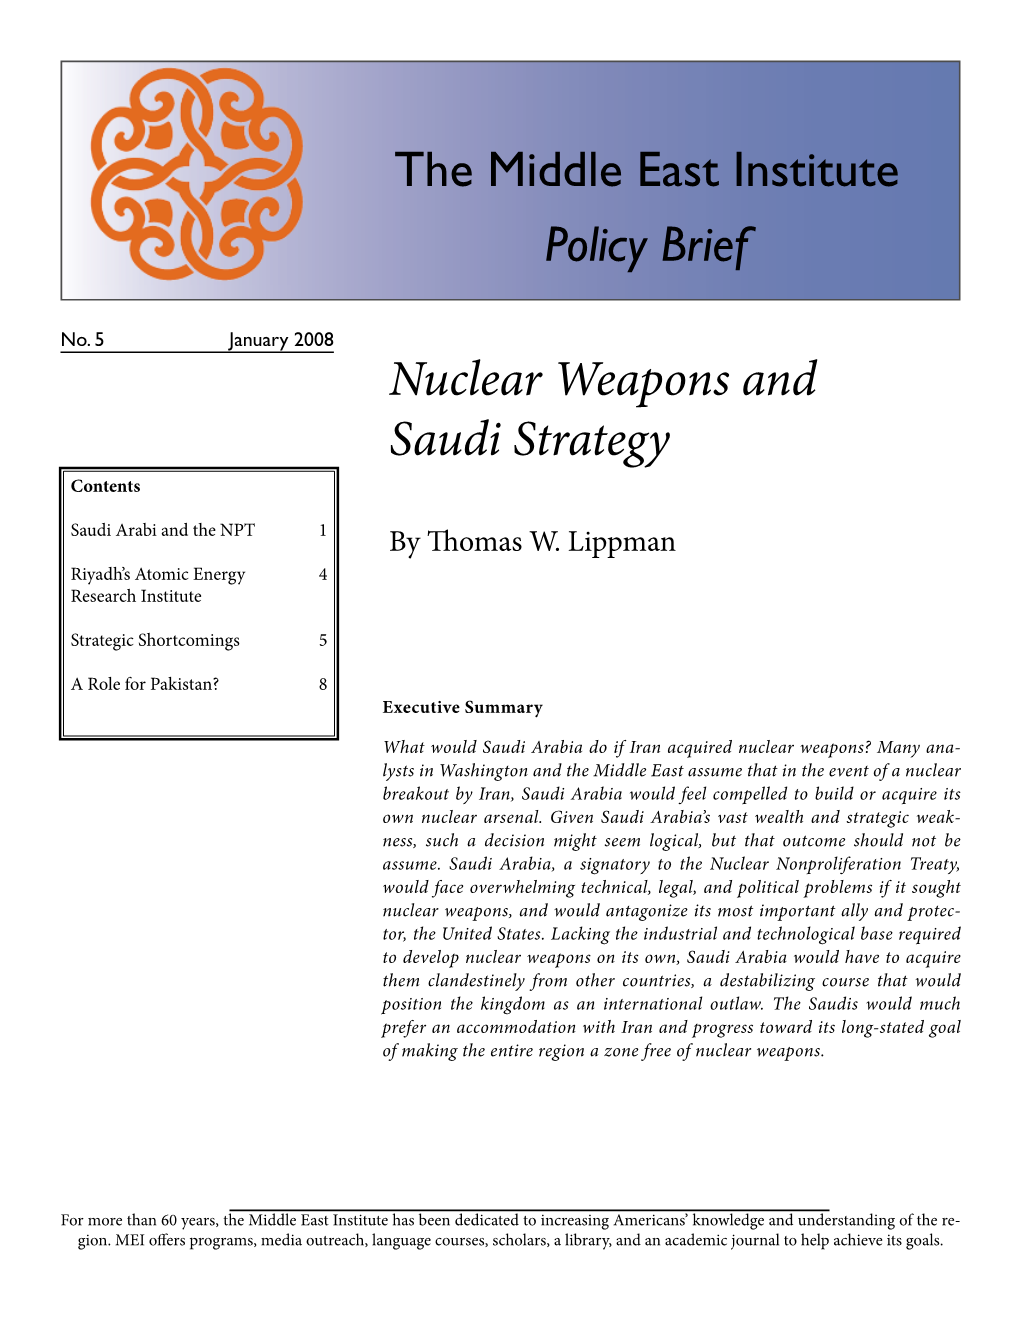 Nuclear Weapons and Saudi Strategy the Middle East Institute Policy Brief